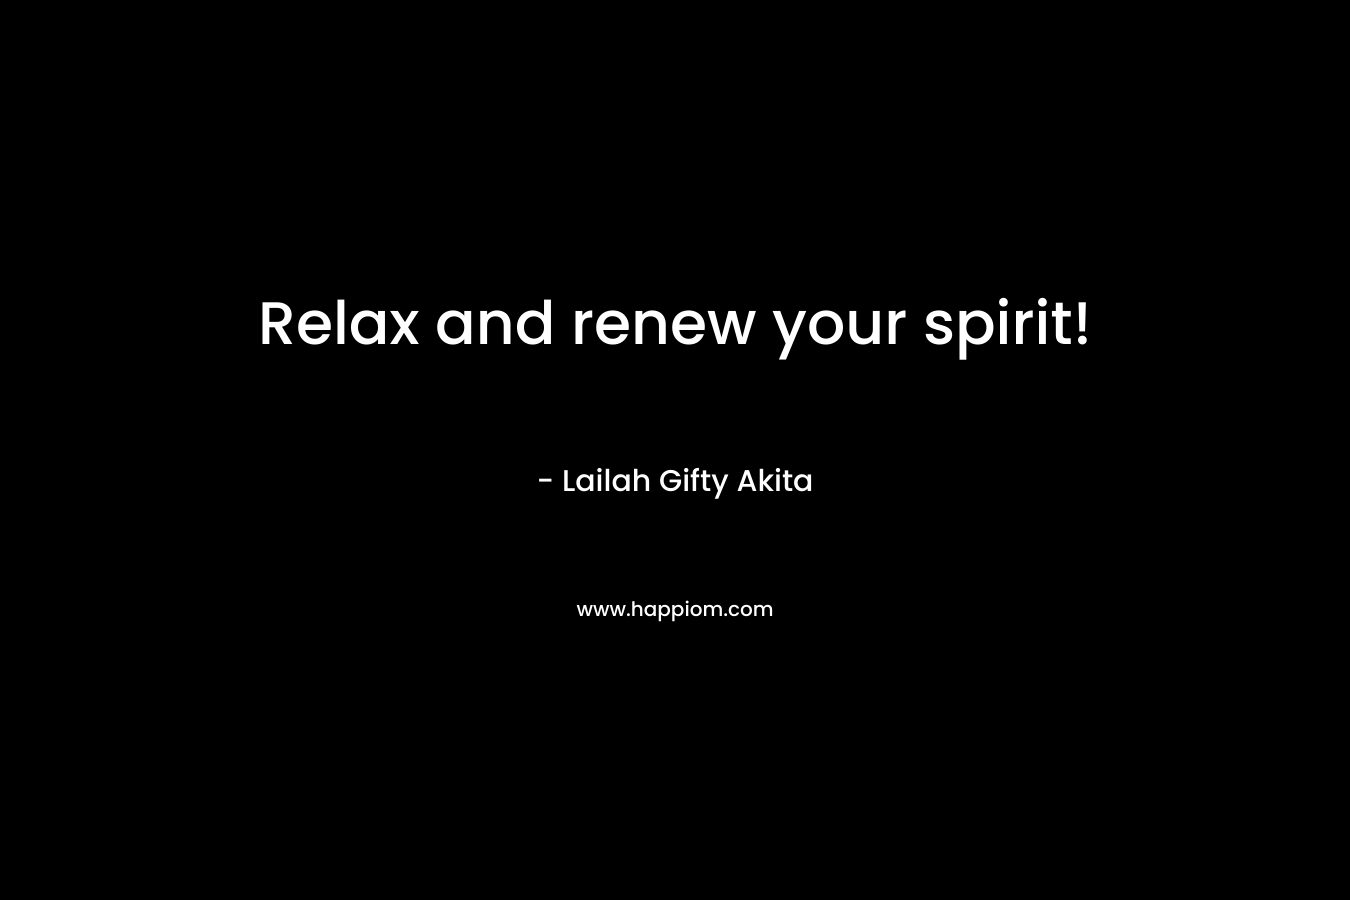 Relax and renew your spirit! – Lailah Gifty Akita